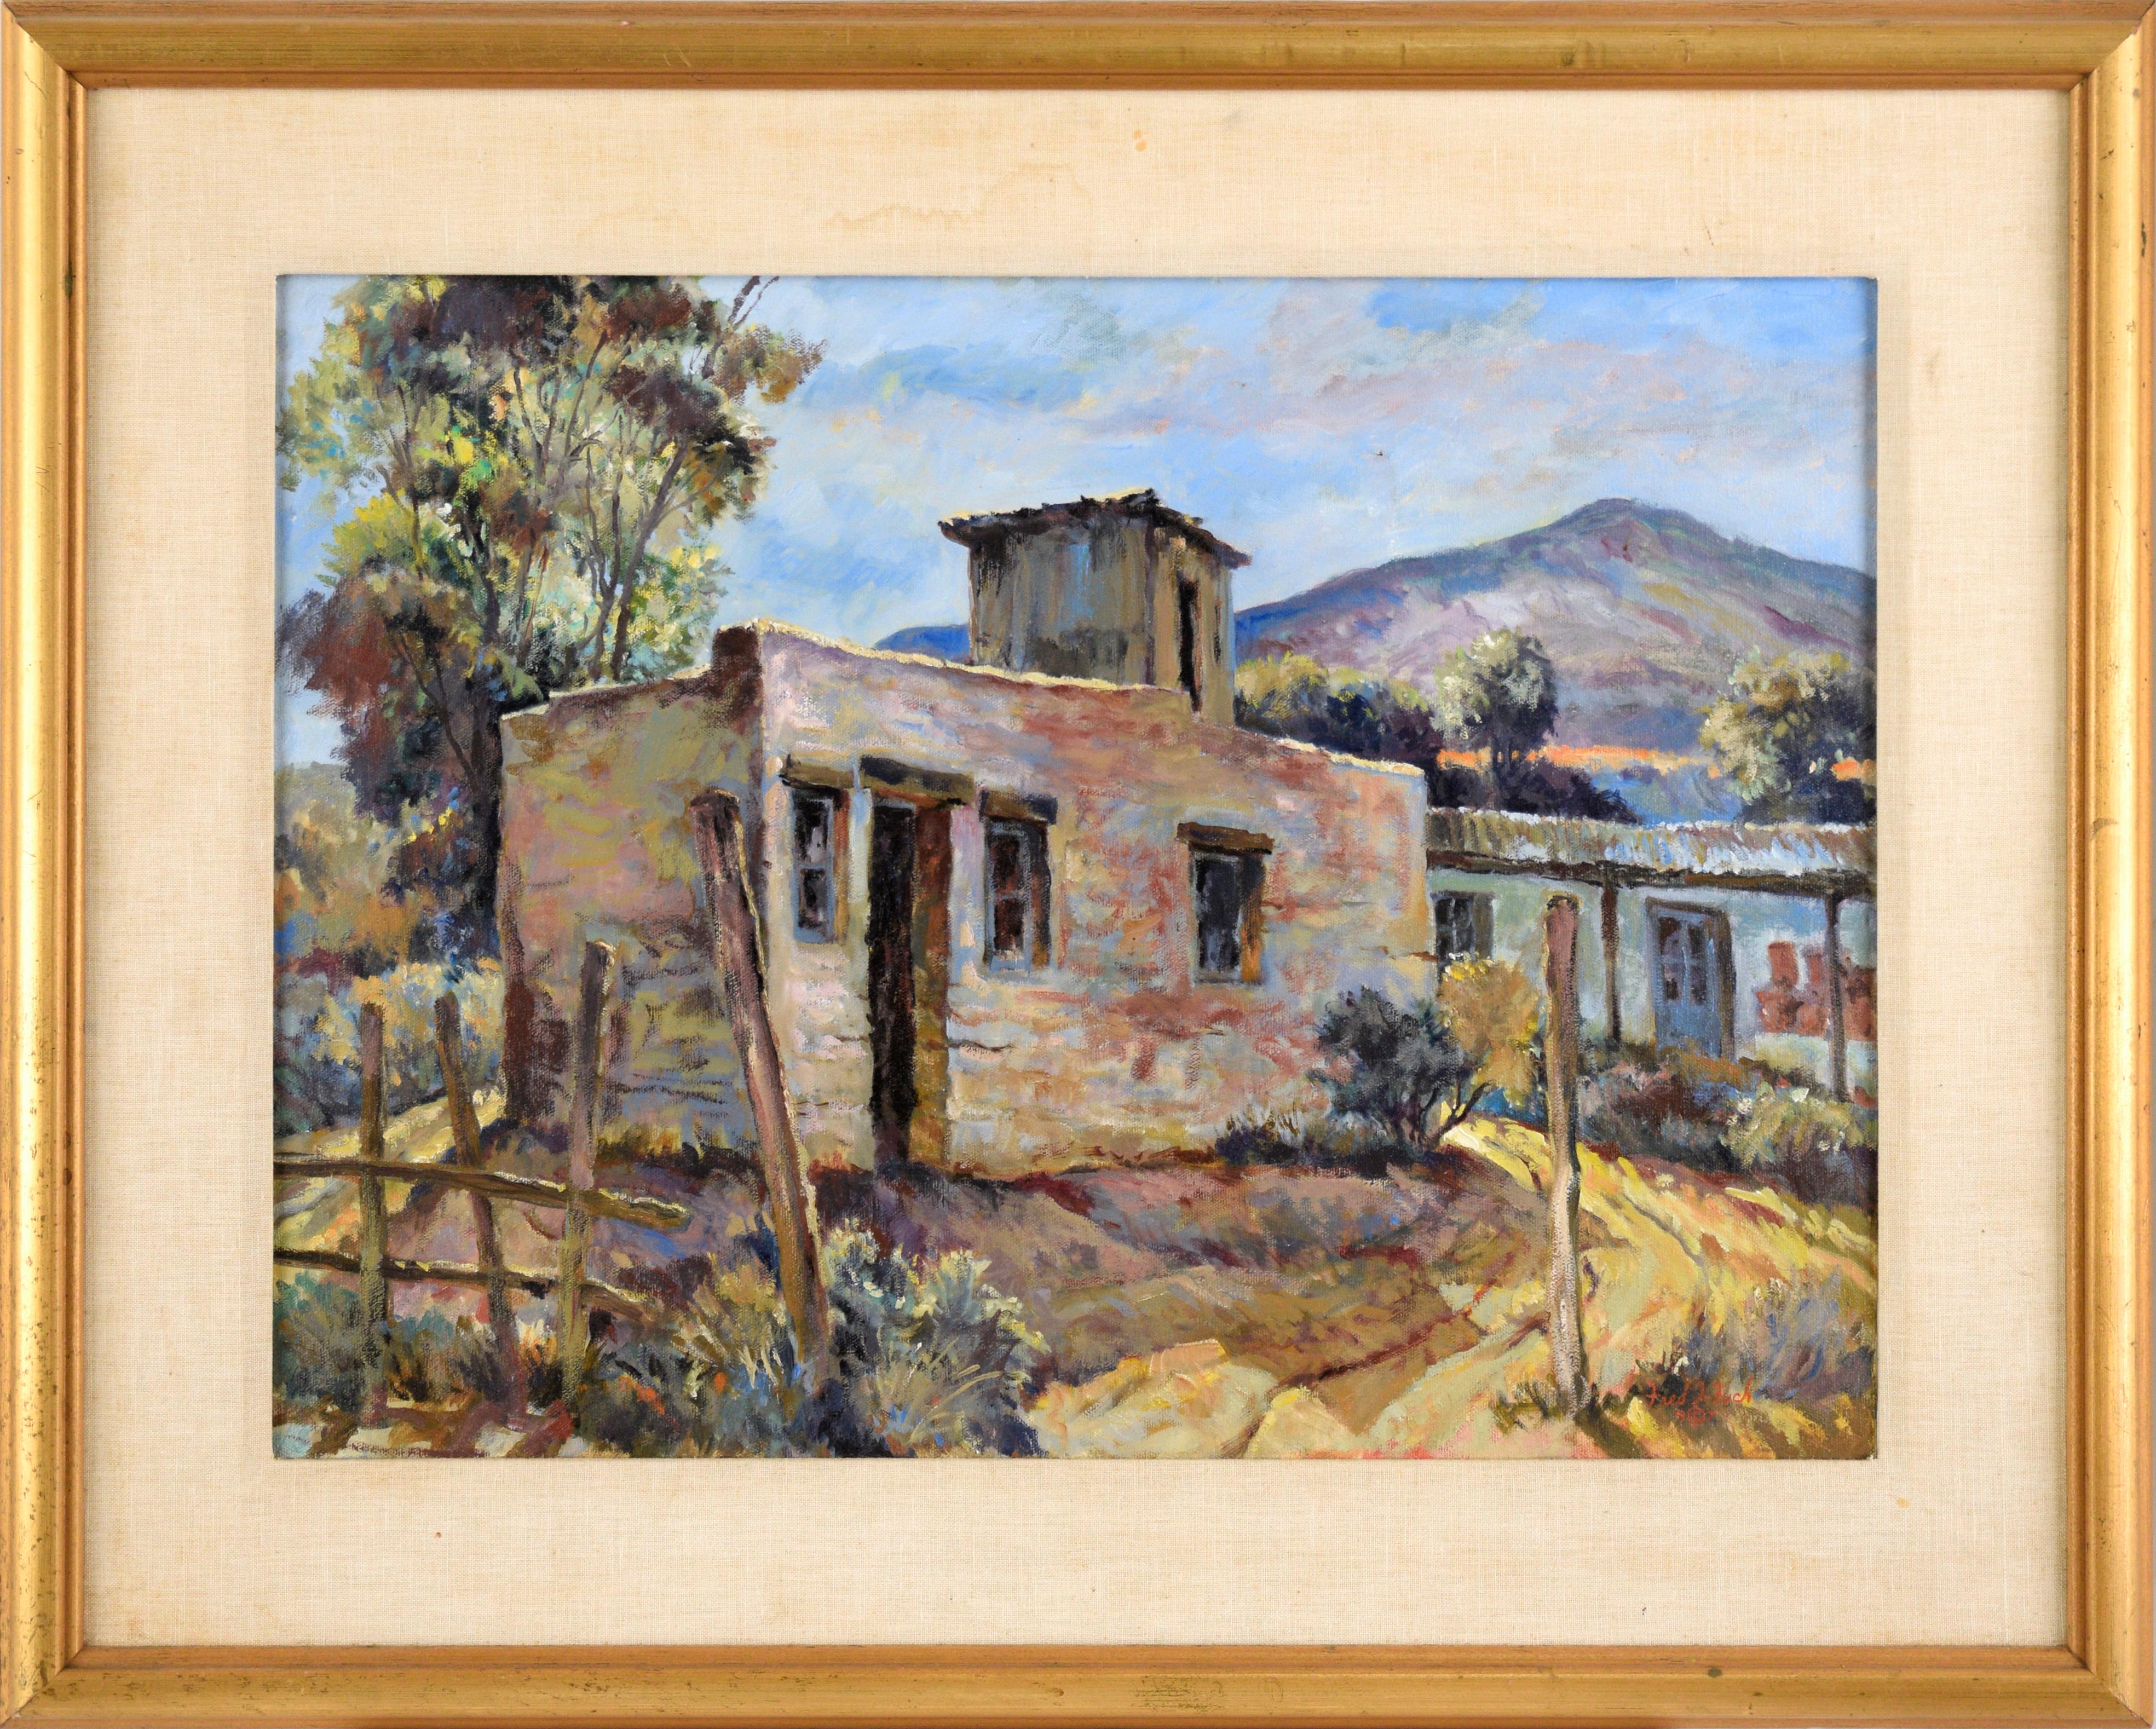 Fred Tuch Landscape Painting - "Backlight Adobe" - Southwest Plein Air Landscape in Oil on Canvas 1997